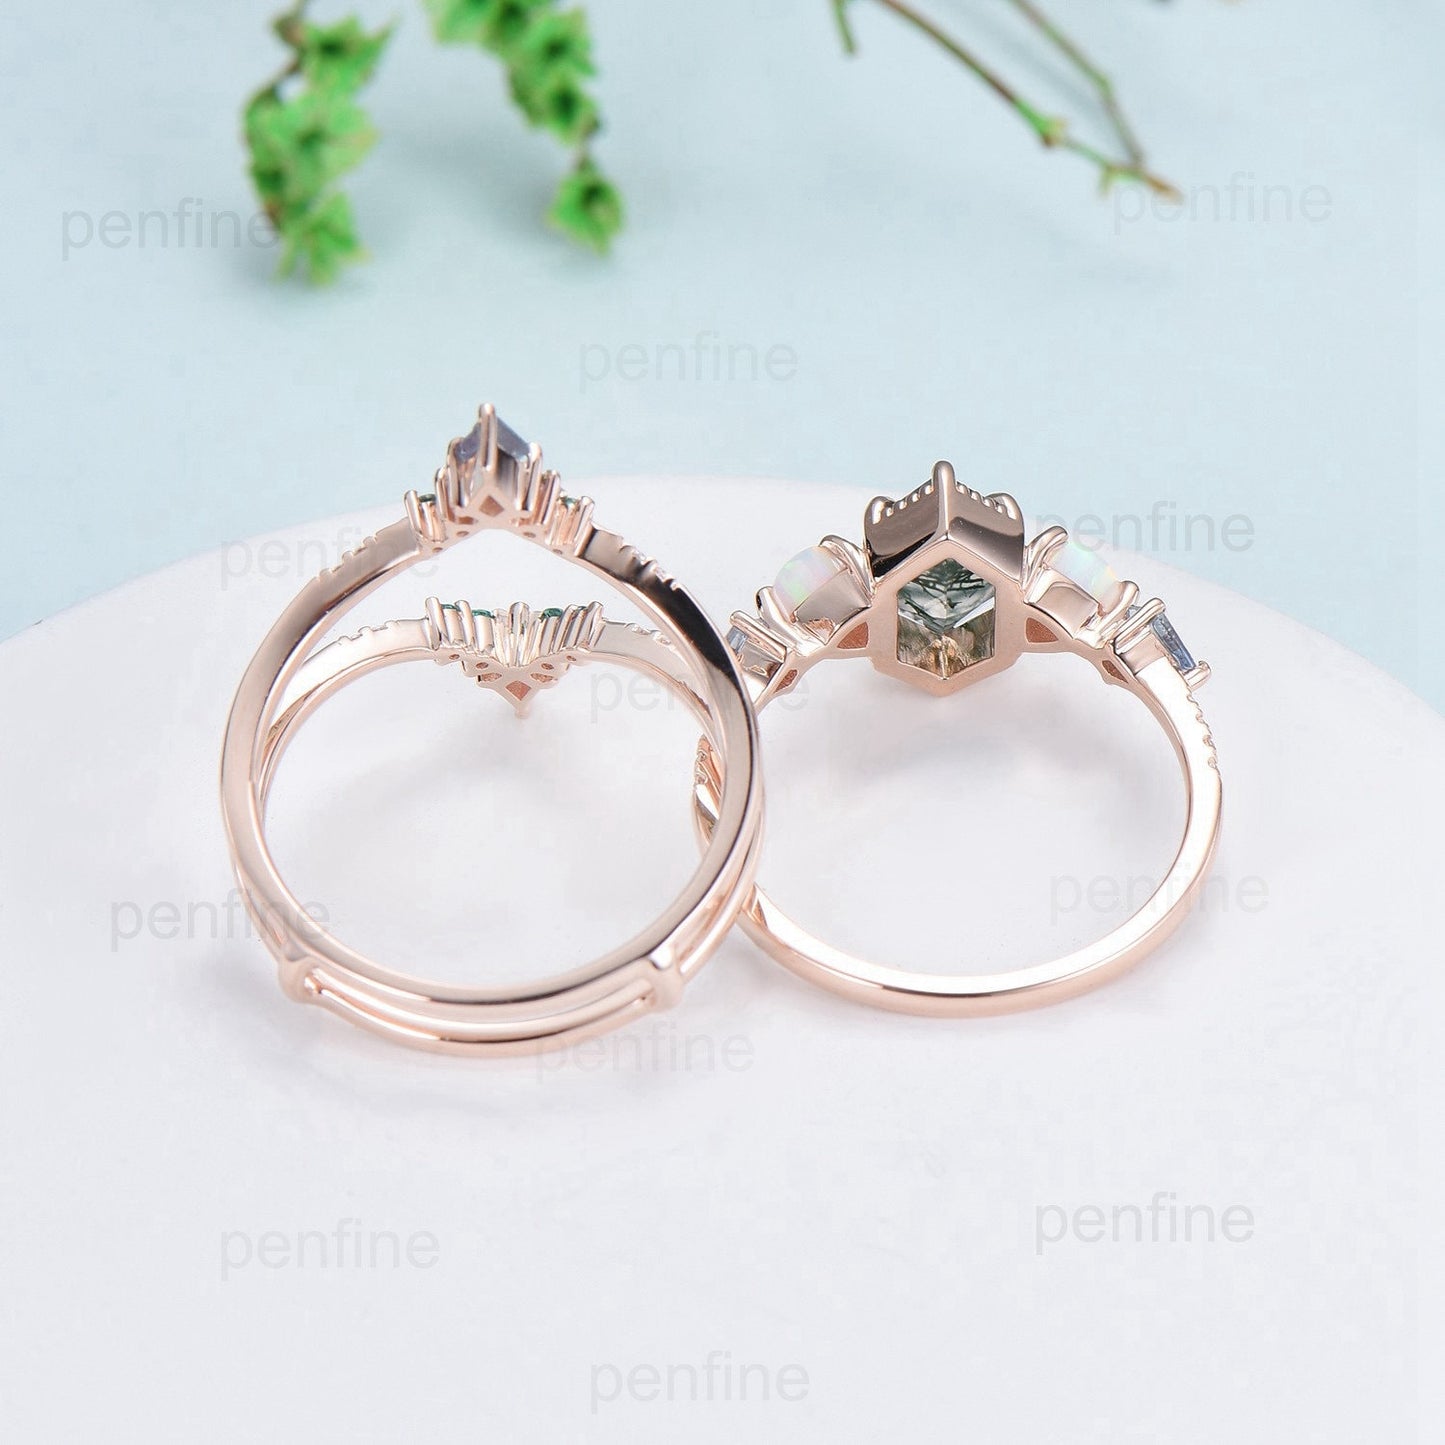 Unique long hexagon alexandrite engagement ring set vintage triangle fire opal kite sapphire wedding ring set double curved v stacking band - PENFINE